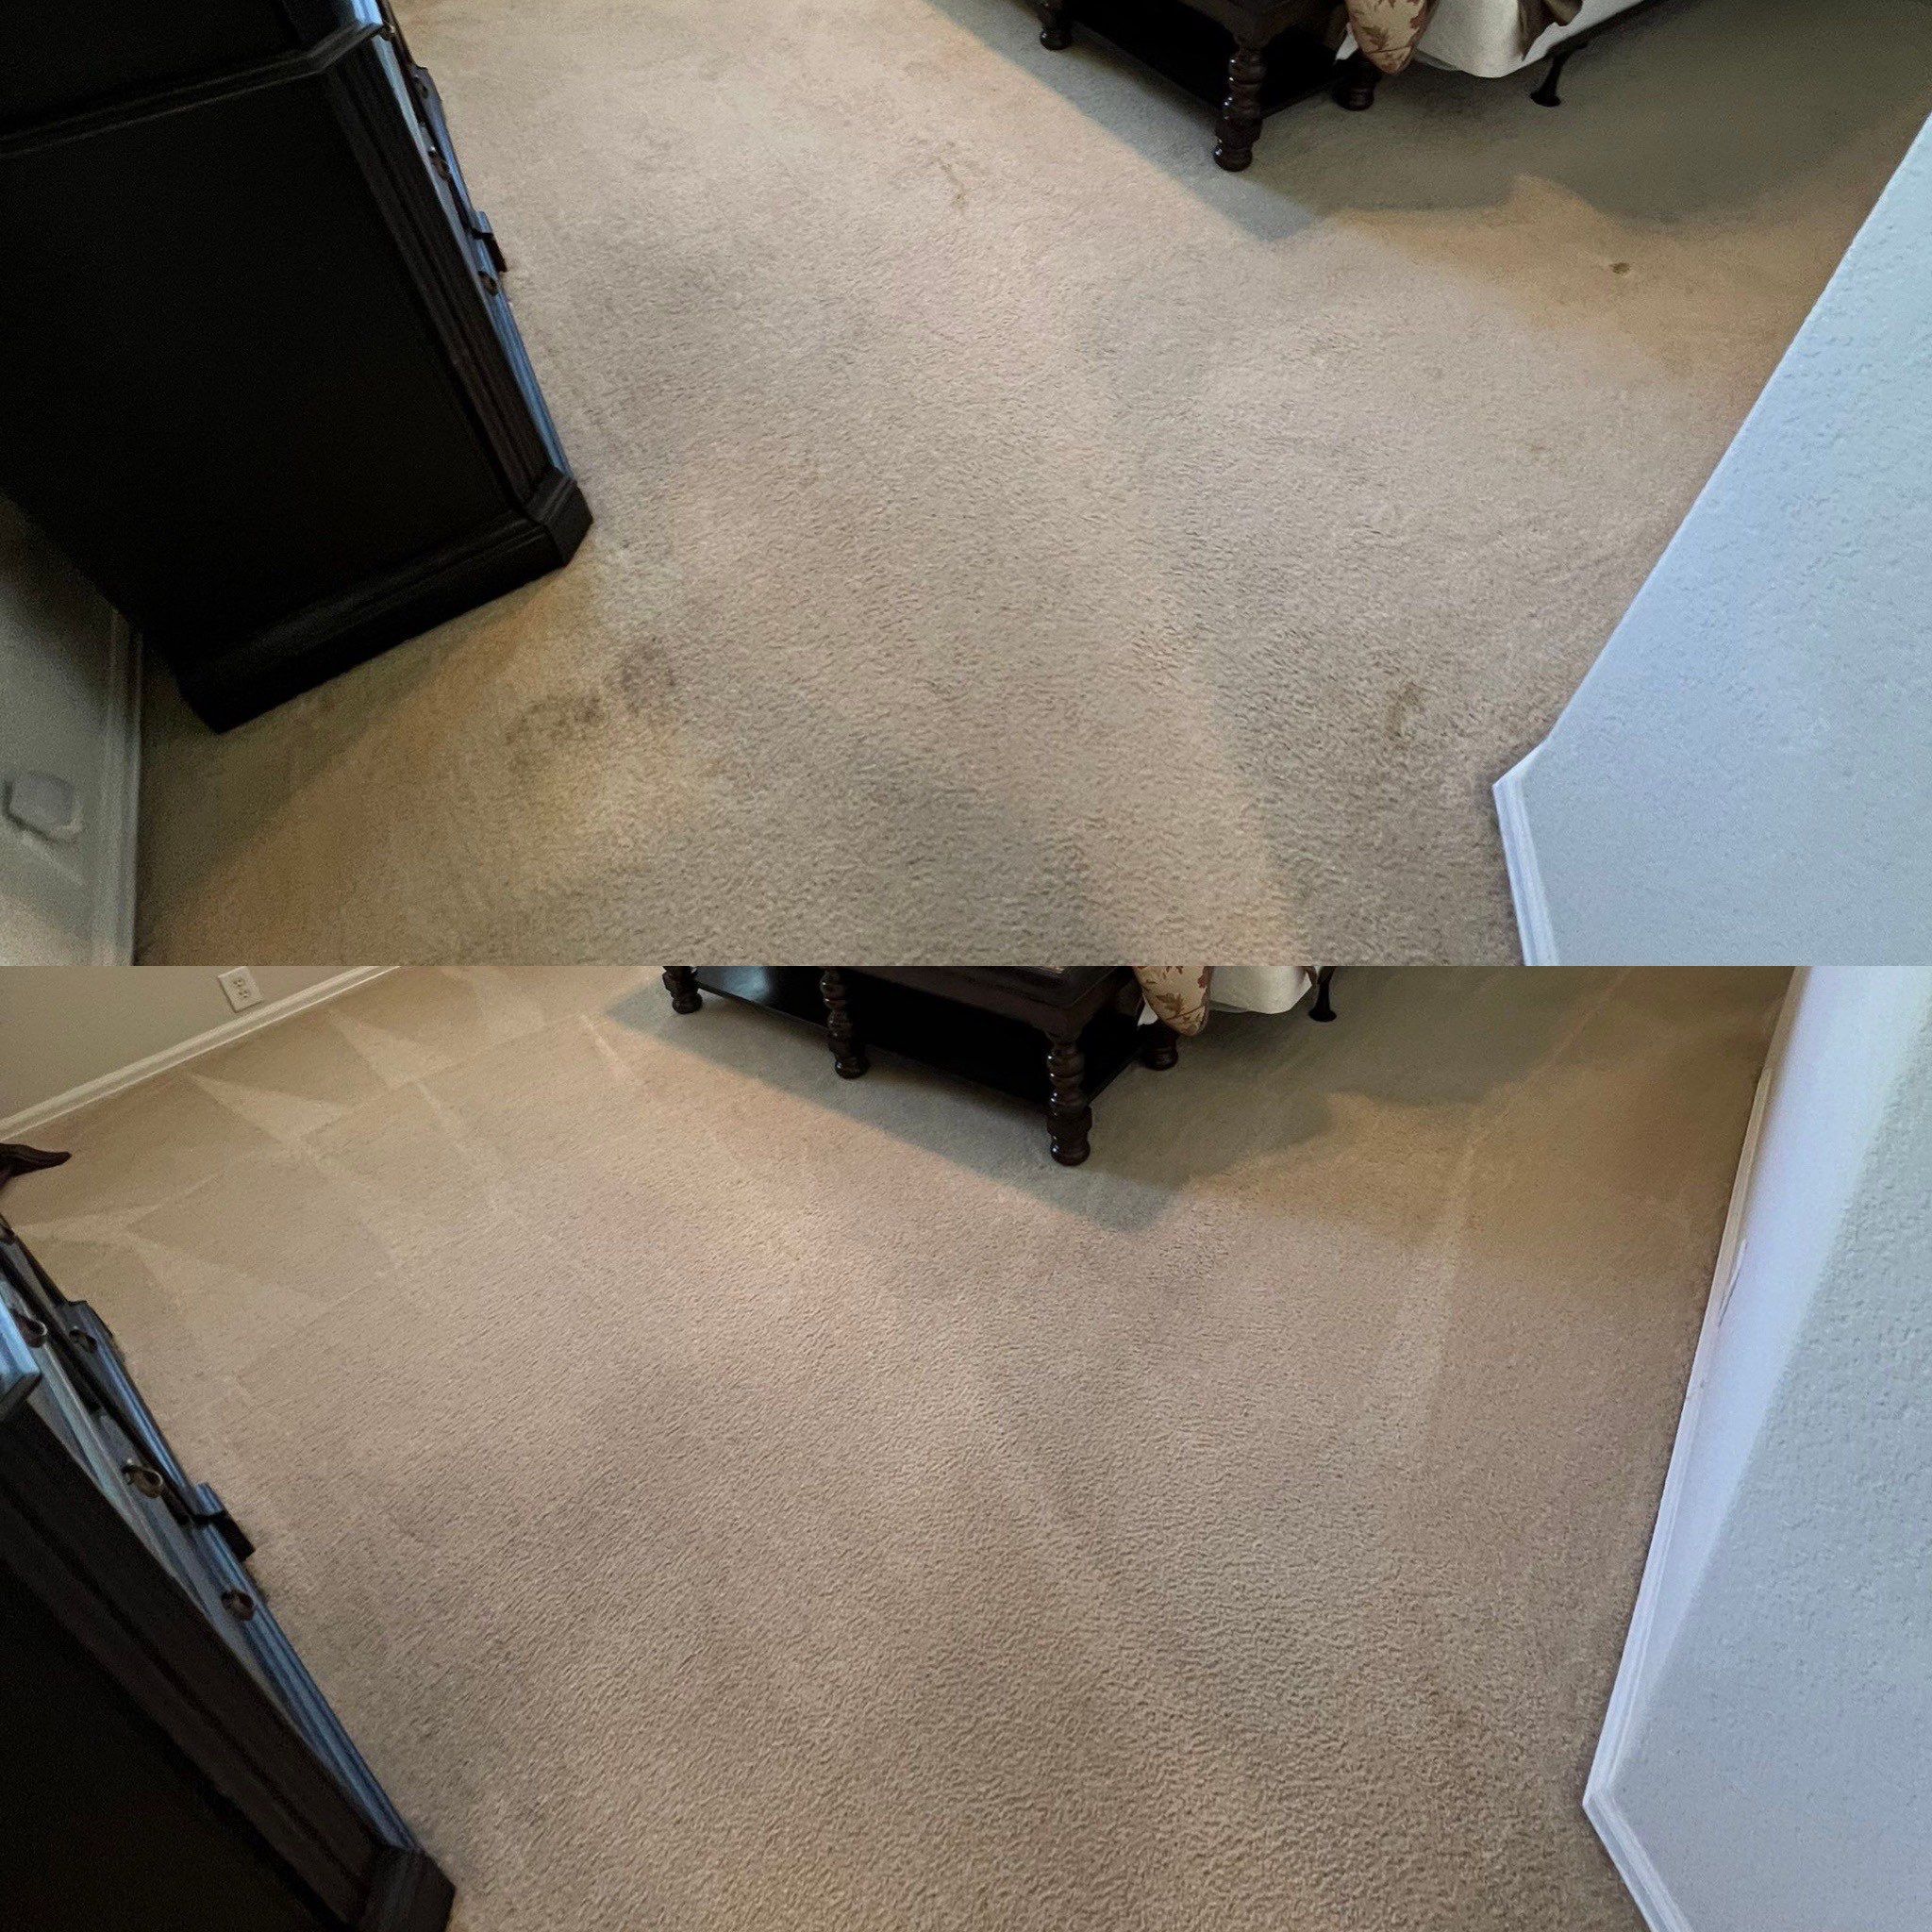 carpet cleaning service making soiled and stained carpet look fresh and clean